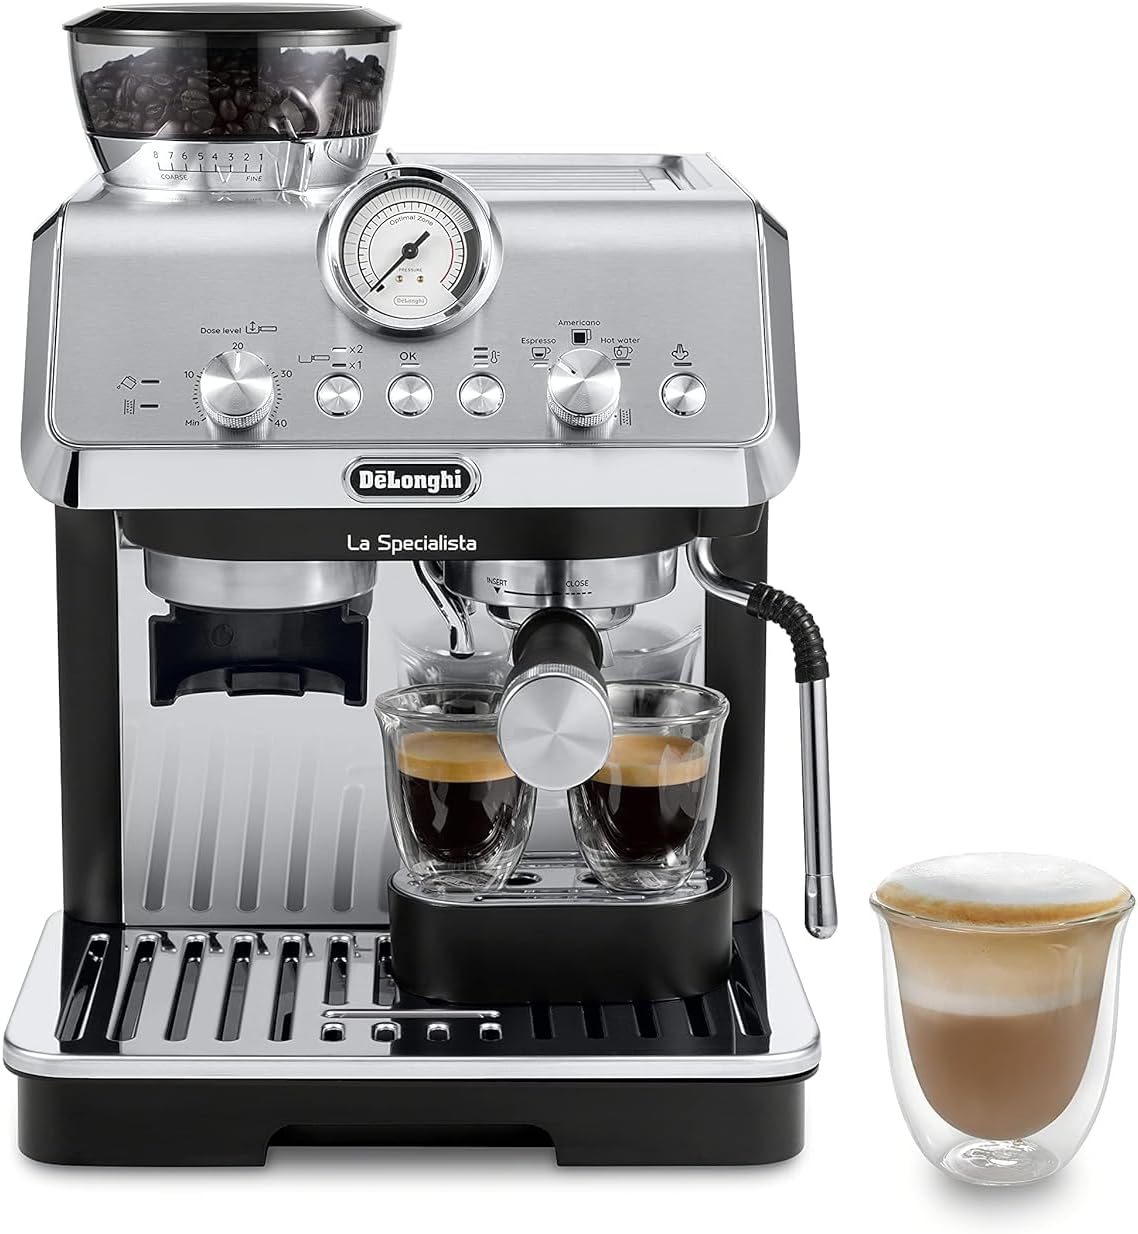 DeLonghi La Specialista Espresso Machine with Grinder, Milk Frother, 1450W, Barista Kit - Bean to Cup Coffee  Cappuccino Maker